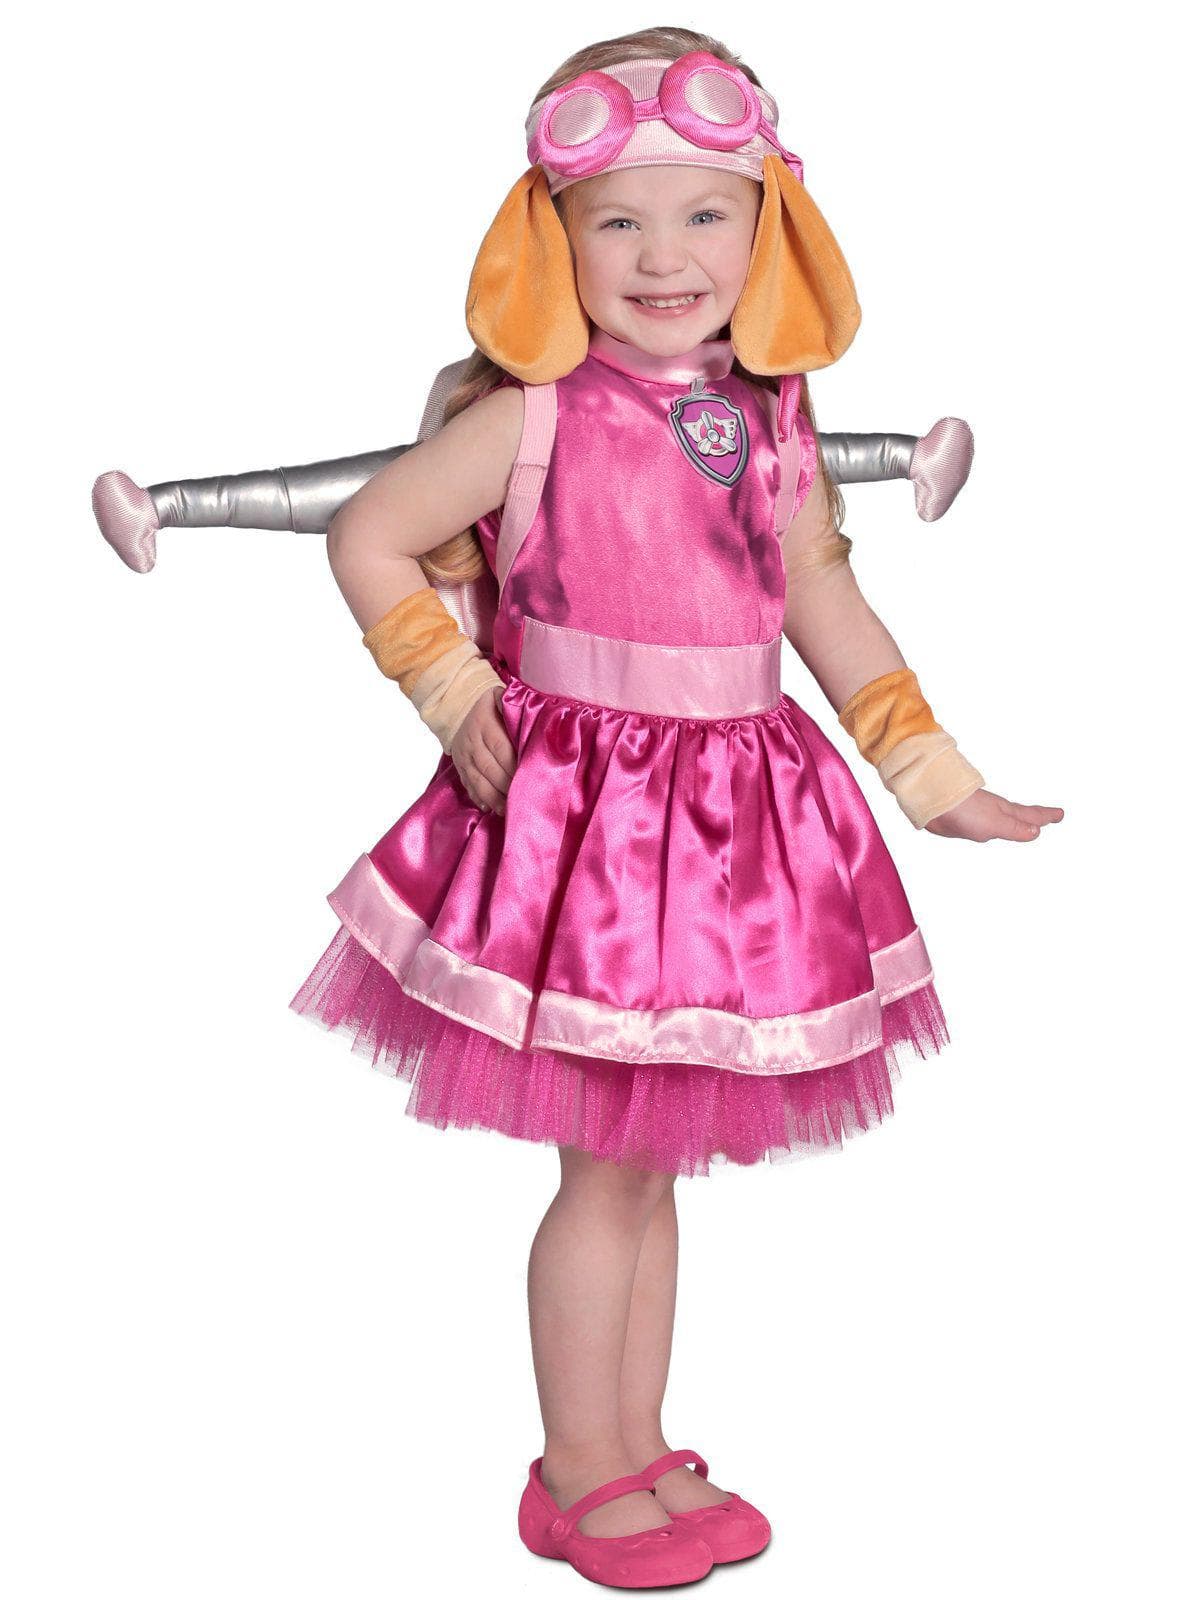 Paw Patrol Skye Costume for Toddlers - costumes.com